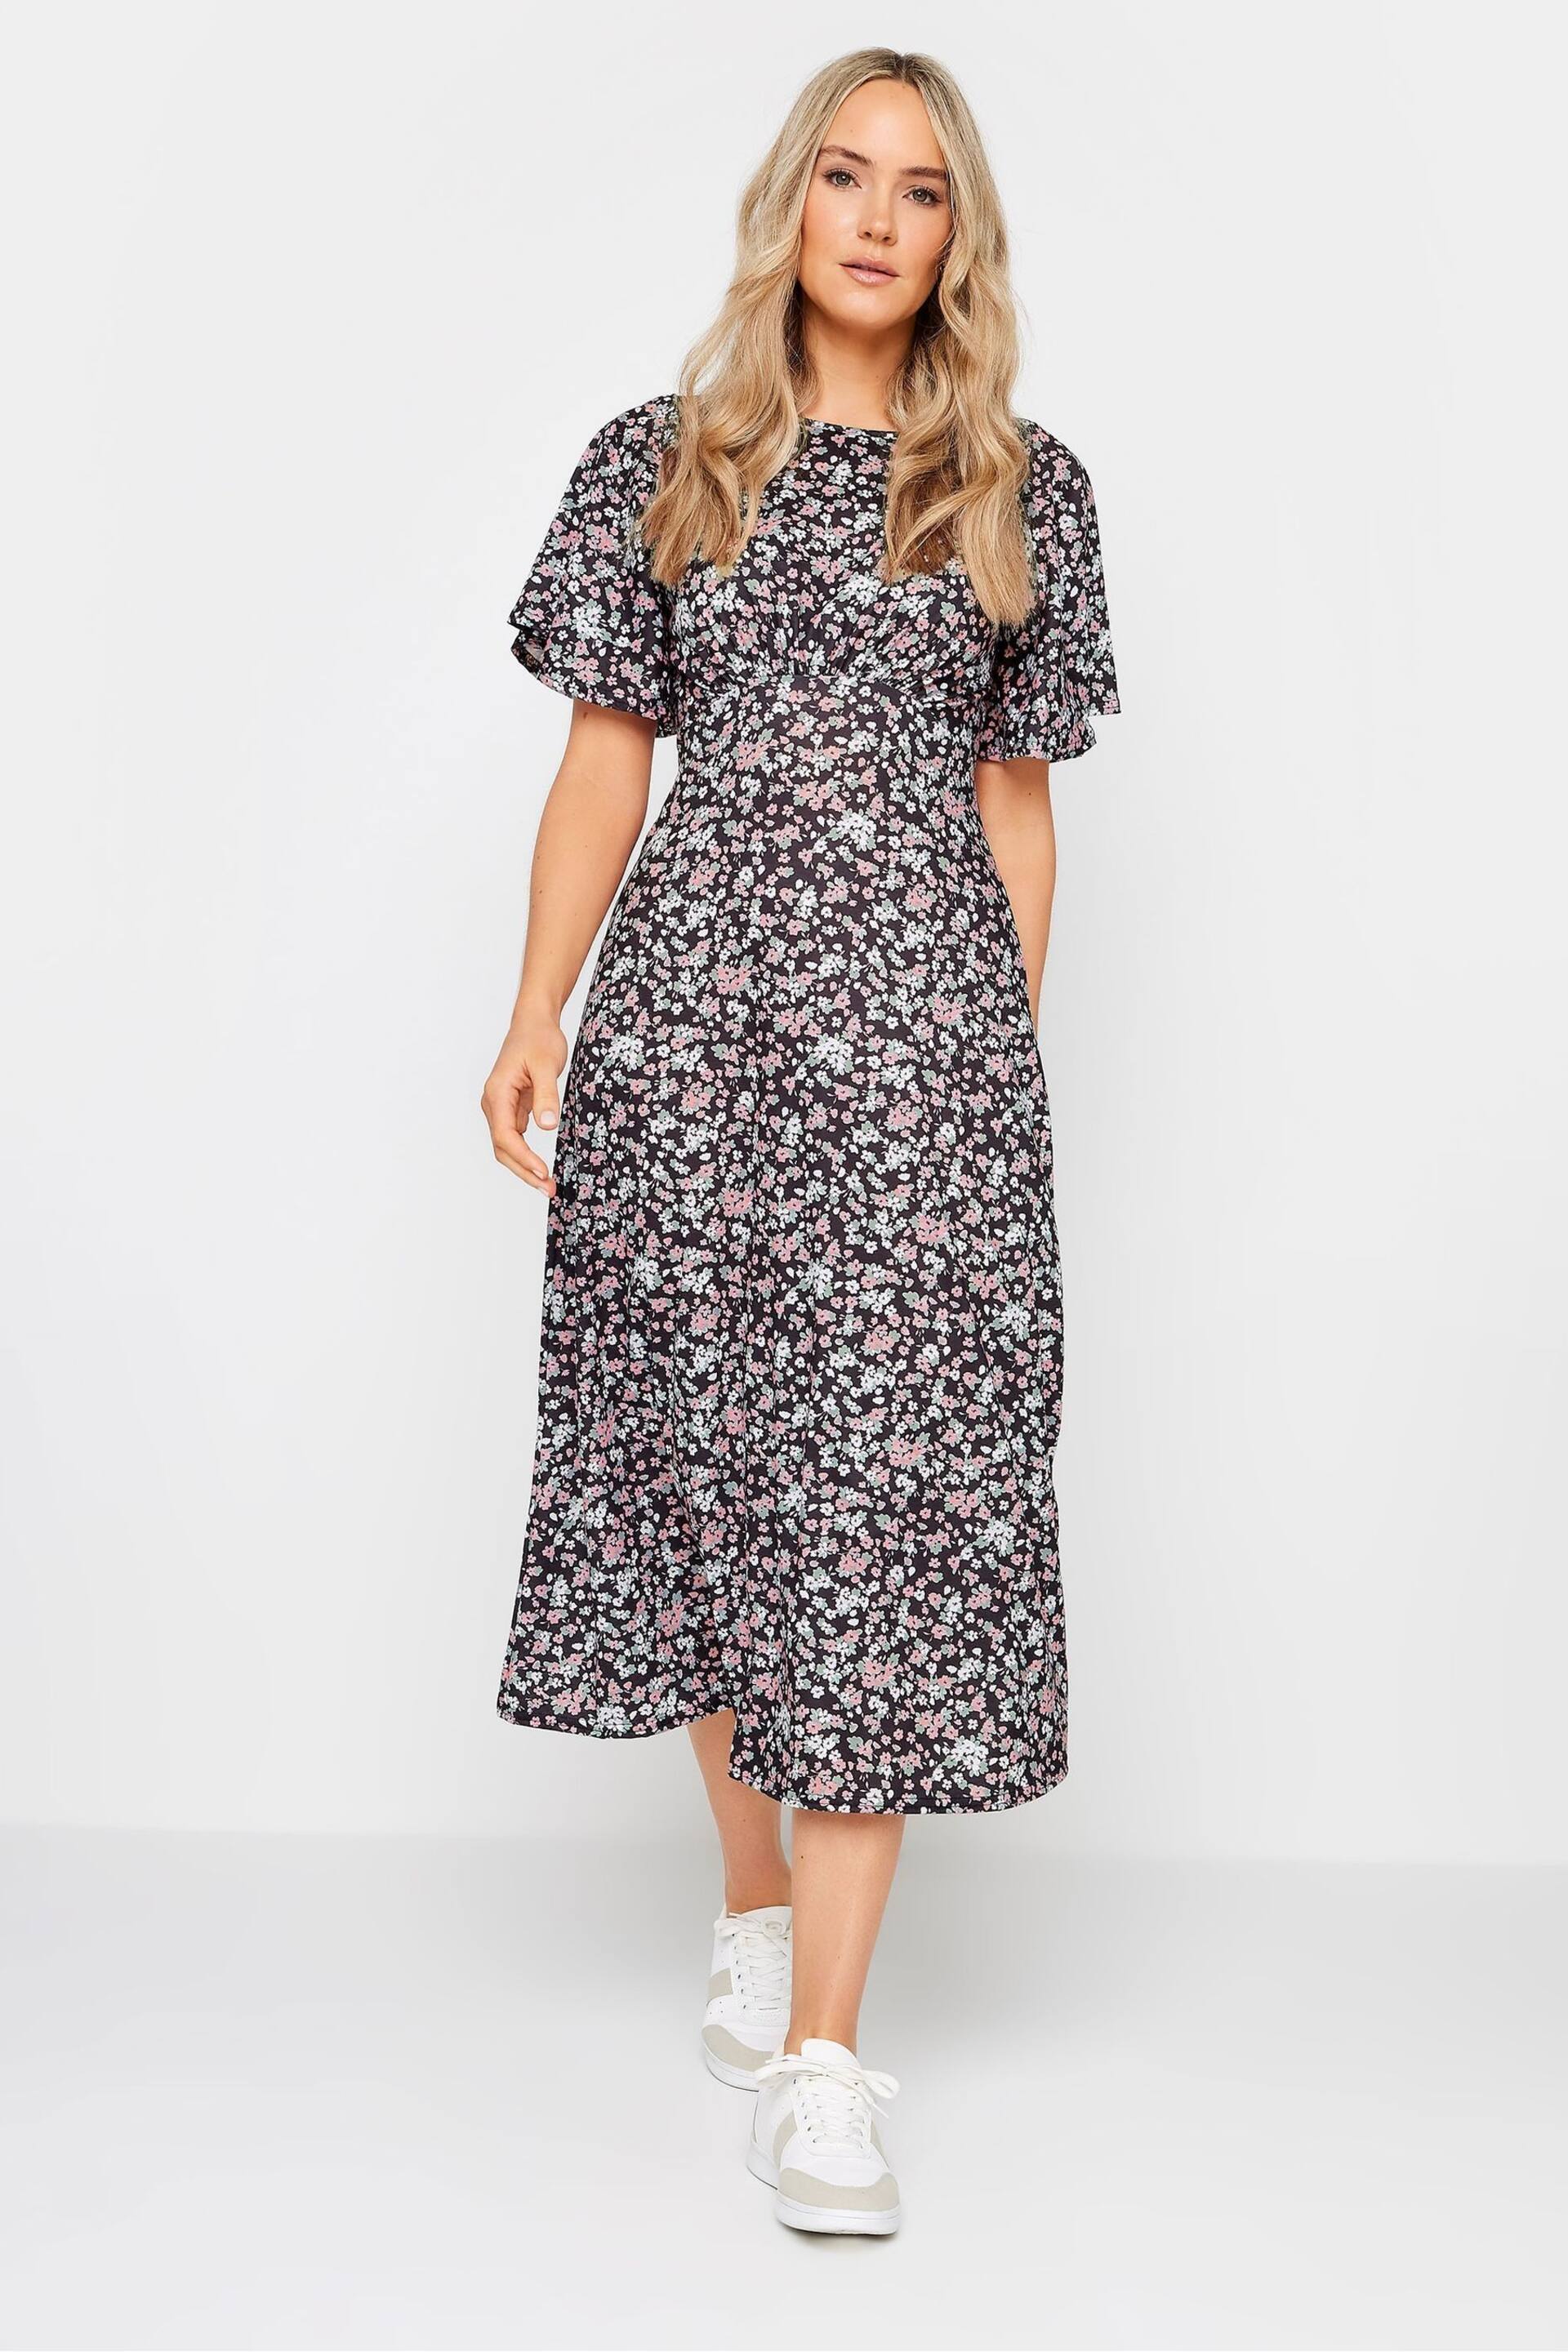 Long Tall Sally Multi Tall Ditsy Floral Midi Dress - Image 1 of 5